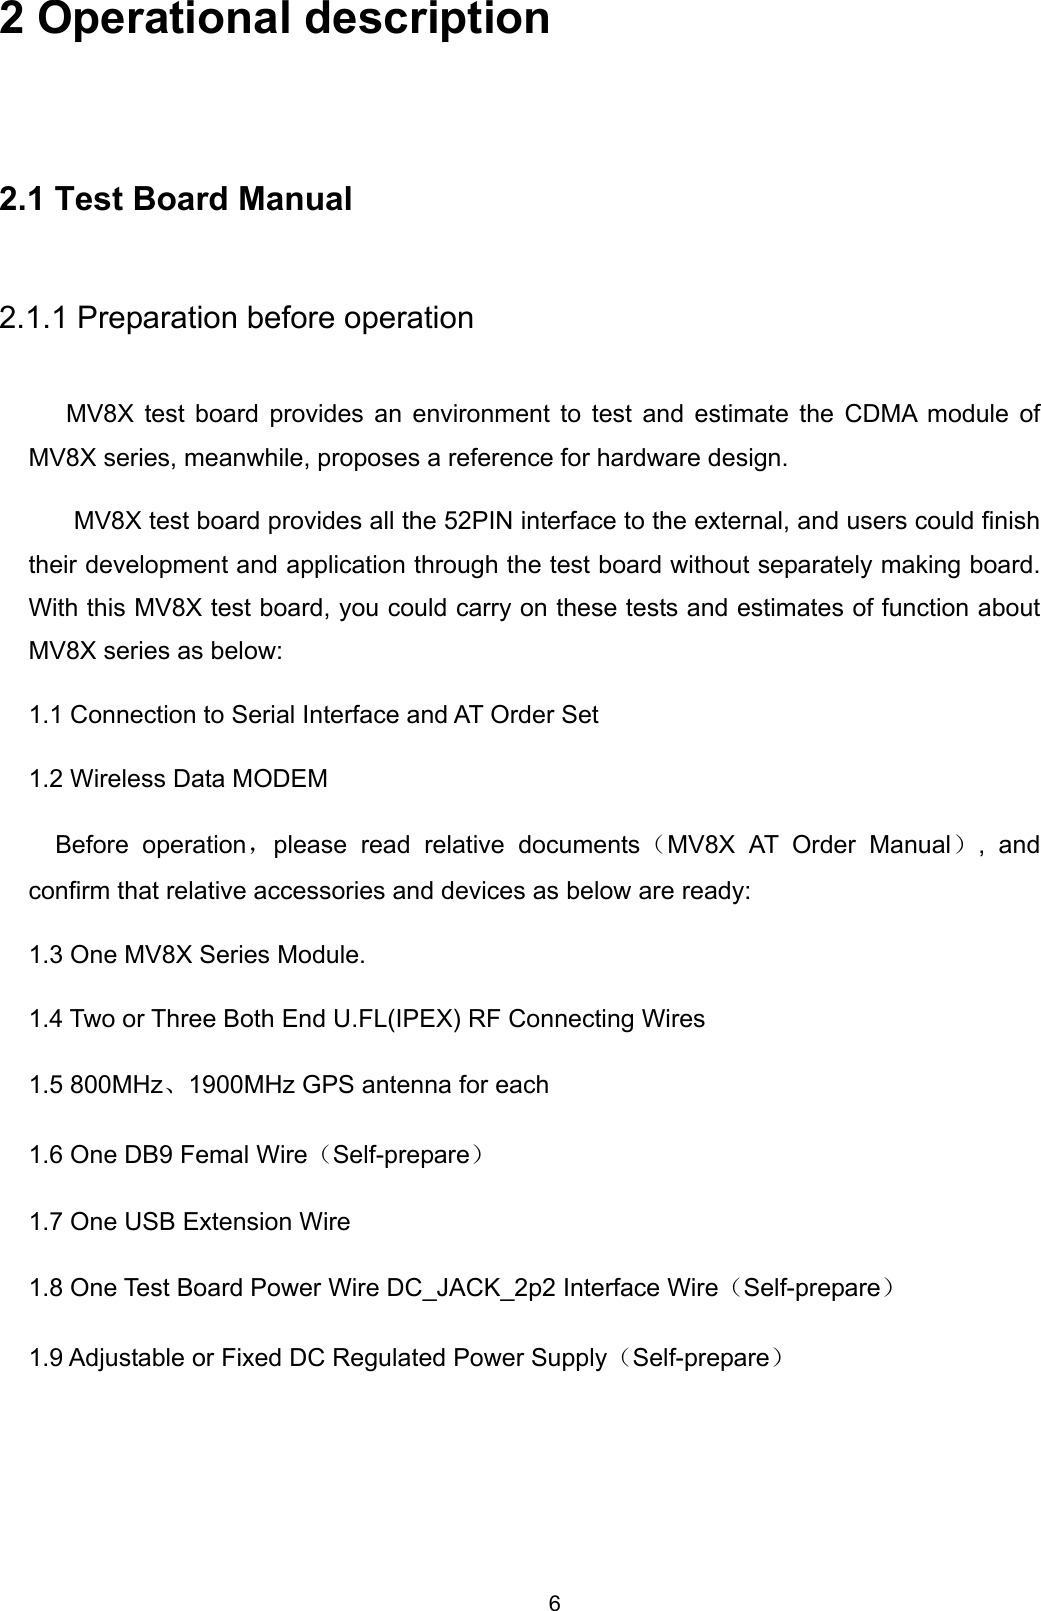 6 2 Operational description 2.1 Test Board Manual 2.1.1 Preparation before operation MV8X test board provides an environment to test and estimate the CDMA module of MV8X series, meanwhile, proposes a reference for hardware design.   MV8X test board provides all the 52PIN interface to the external, and users could finish their development and application through the test board without separately making board. With this MV8X test board, you could carry on these tests and estimates of function about MV8X series as below:   1.1 Connection to Serial Interface and AT Order Set   1.2 Wireless Data MODEM Before operation，please read relative documents（MV8X AT Order Manual）, and confirm that relative accessories and devices as below are ready:   1.3 One MV8X Series Module.   1.4 Two or Three Both End U.FL(IPEX) RF Connecting Wires   1.5 800MHz、1900MHz GPS antenna for each 1.6 One DB9 Femal Wire（Self-prepare） 1.7 One USB Extension Wire 1.8 One Test Board Power Wire DC_JACK_2p2 Interface Wire（Self-prepare） 1.9 Adjustable or Fixed DC Regulated Power Supply（Self-prepare）      